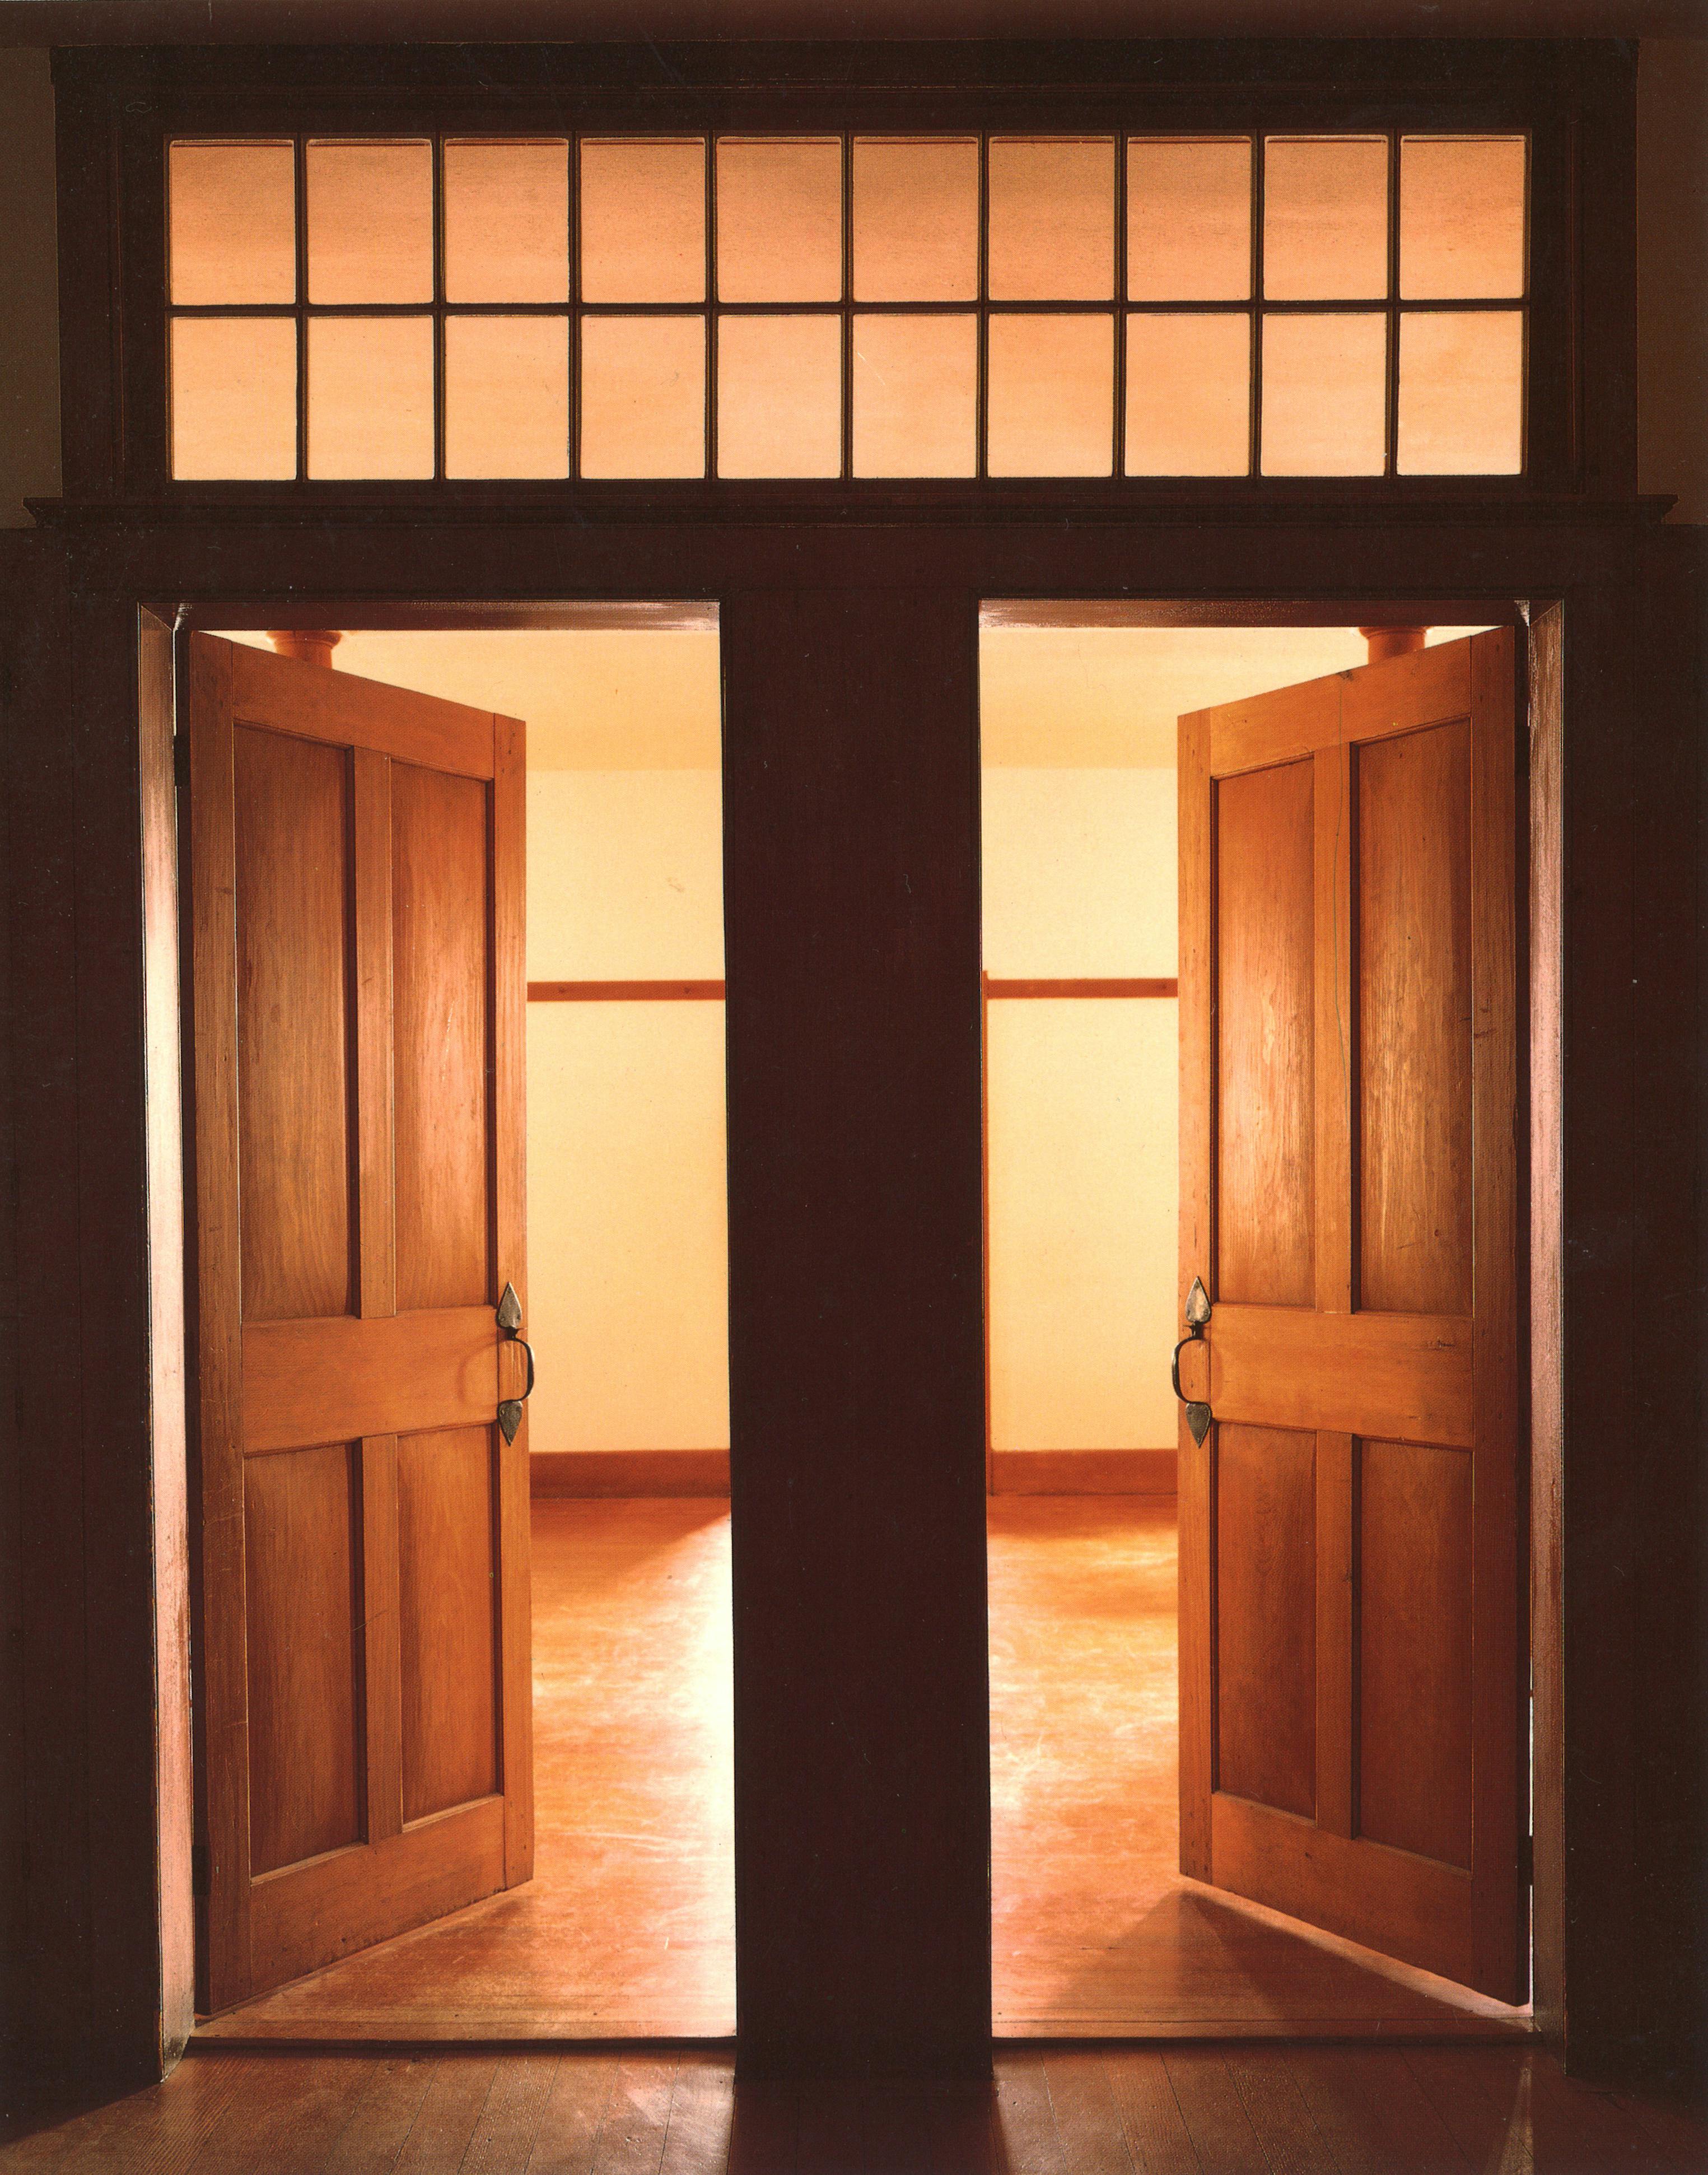 Double portal into a Shaker room. The Shakers exercised a radical form of equality of the sexes across every aspect of life in society. Despite their vows of celibacy, men and women lived under one roof, constantly aware of the opposite sex but restrained from carnal temptation by a minutely choreographed way of life. Image: Paul Rocheleau